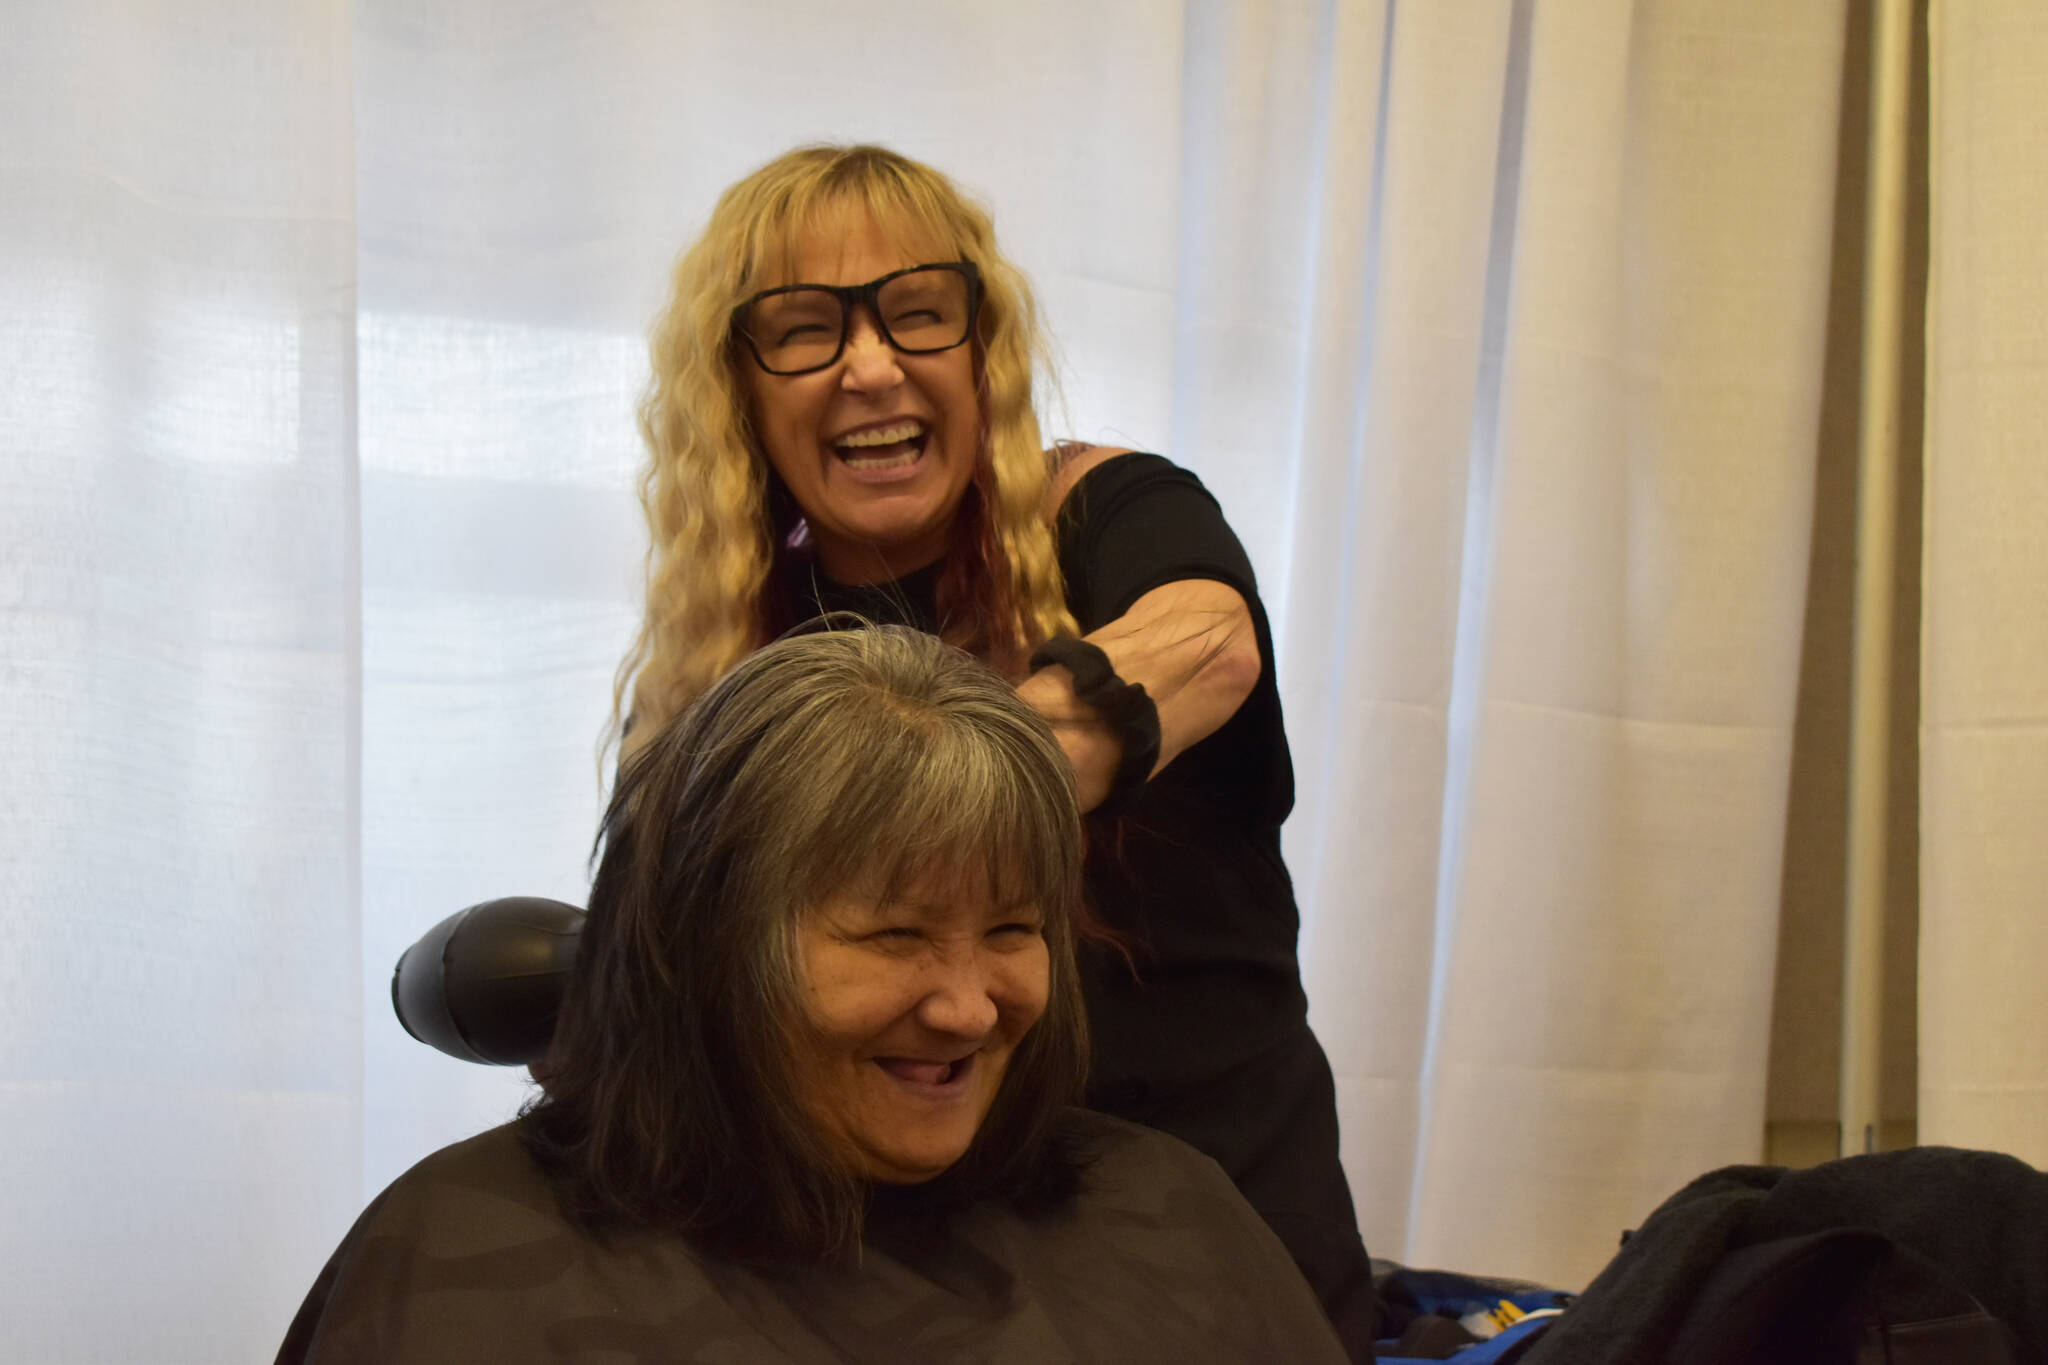 Tamera Mapes and a client laugh and joke with one another during a free haircut at Project Homeless Connect on Tuesday, Jan. 31, 2023, at the Soldotna Regional Sports Complex in Soldotna, Alaska. (Jake Dye/Peninsula Clarion)